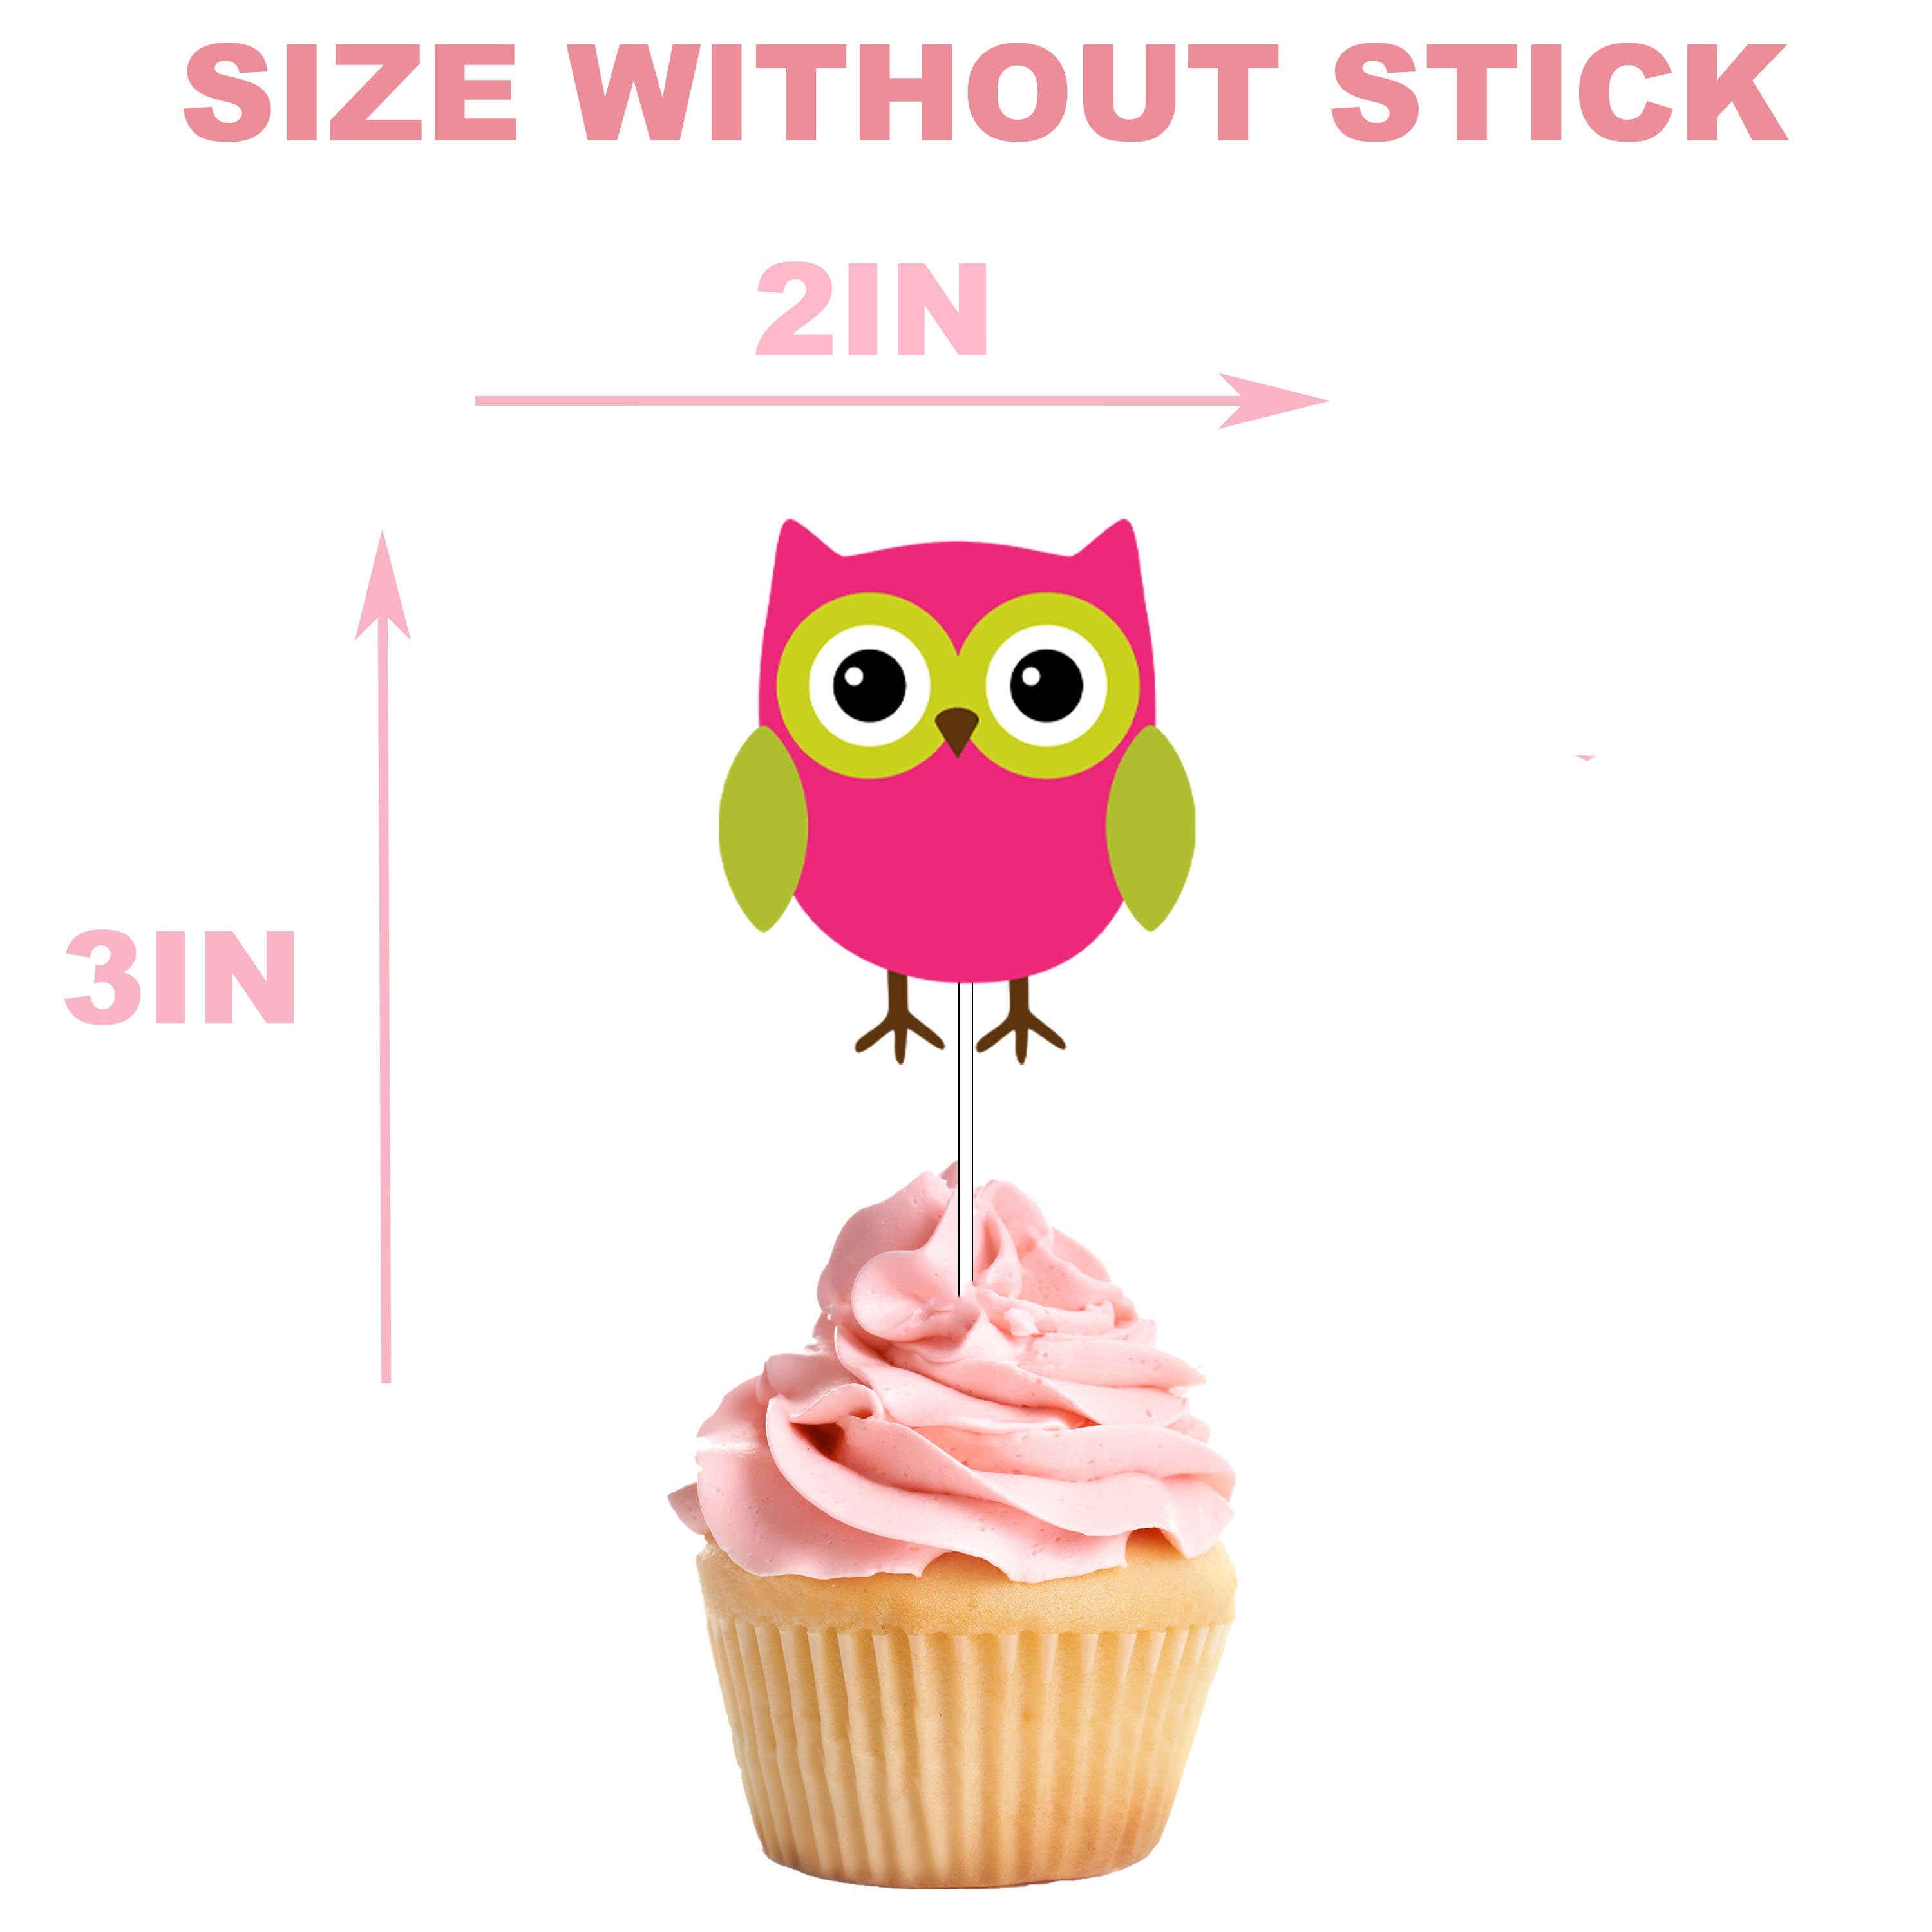 Whimsical Owl Cupcake Toppers - Perfect for Adding a Wise Touch to Your Sweet Celebrations!